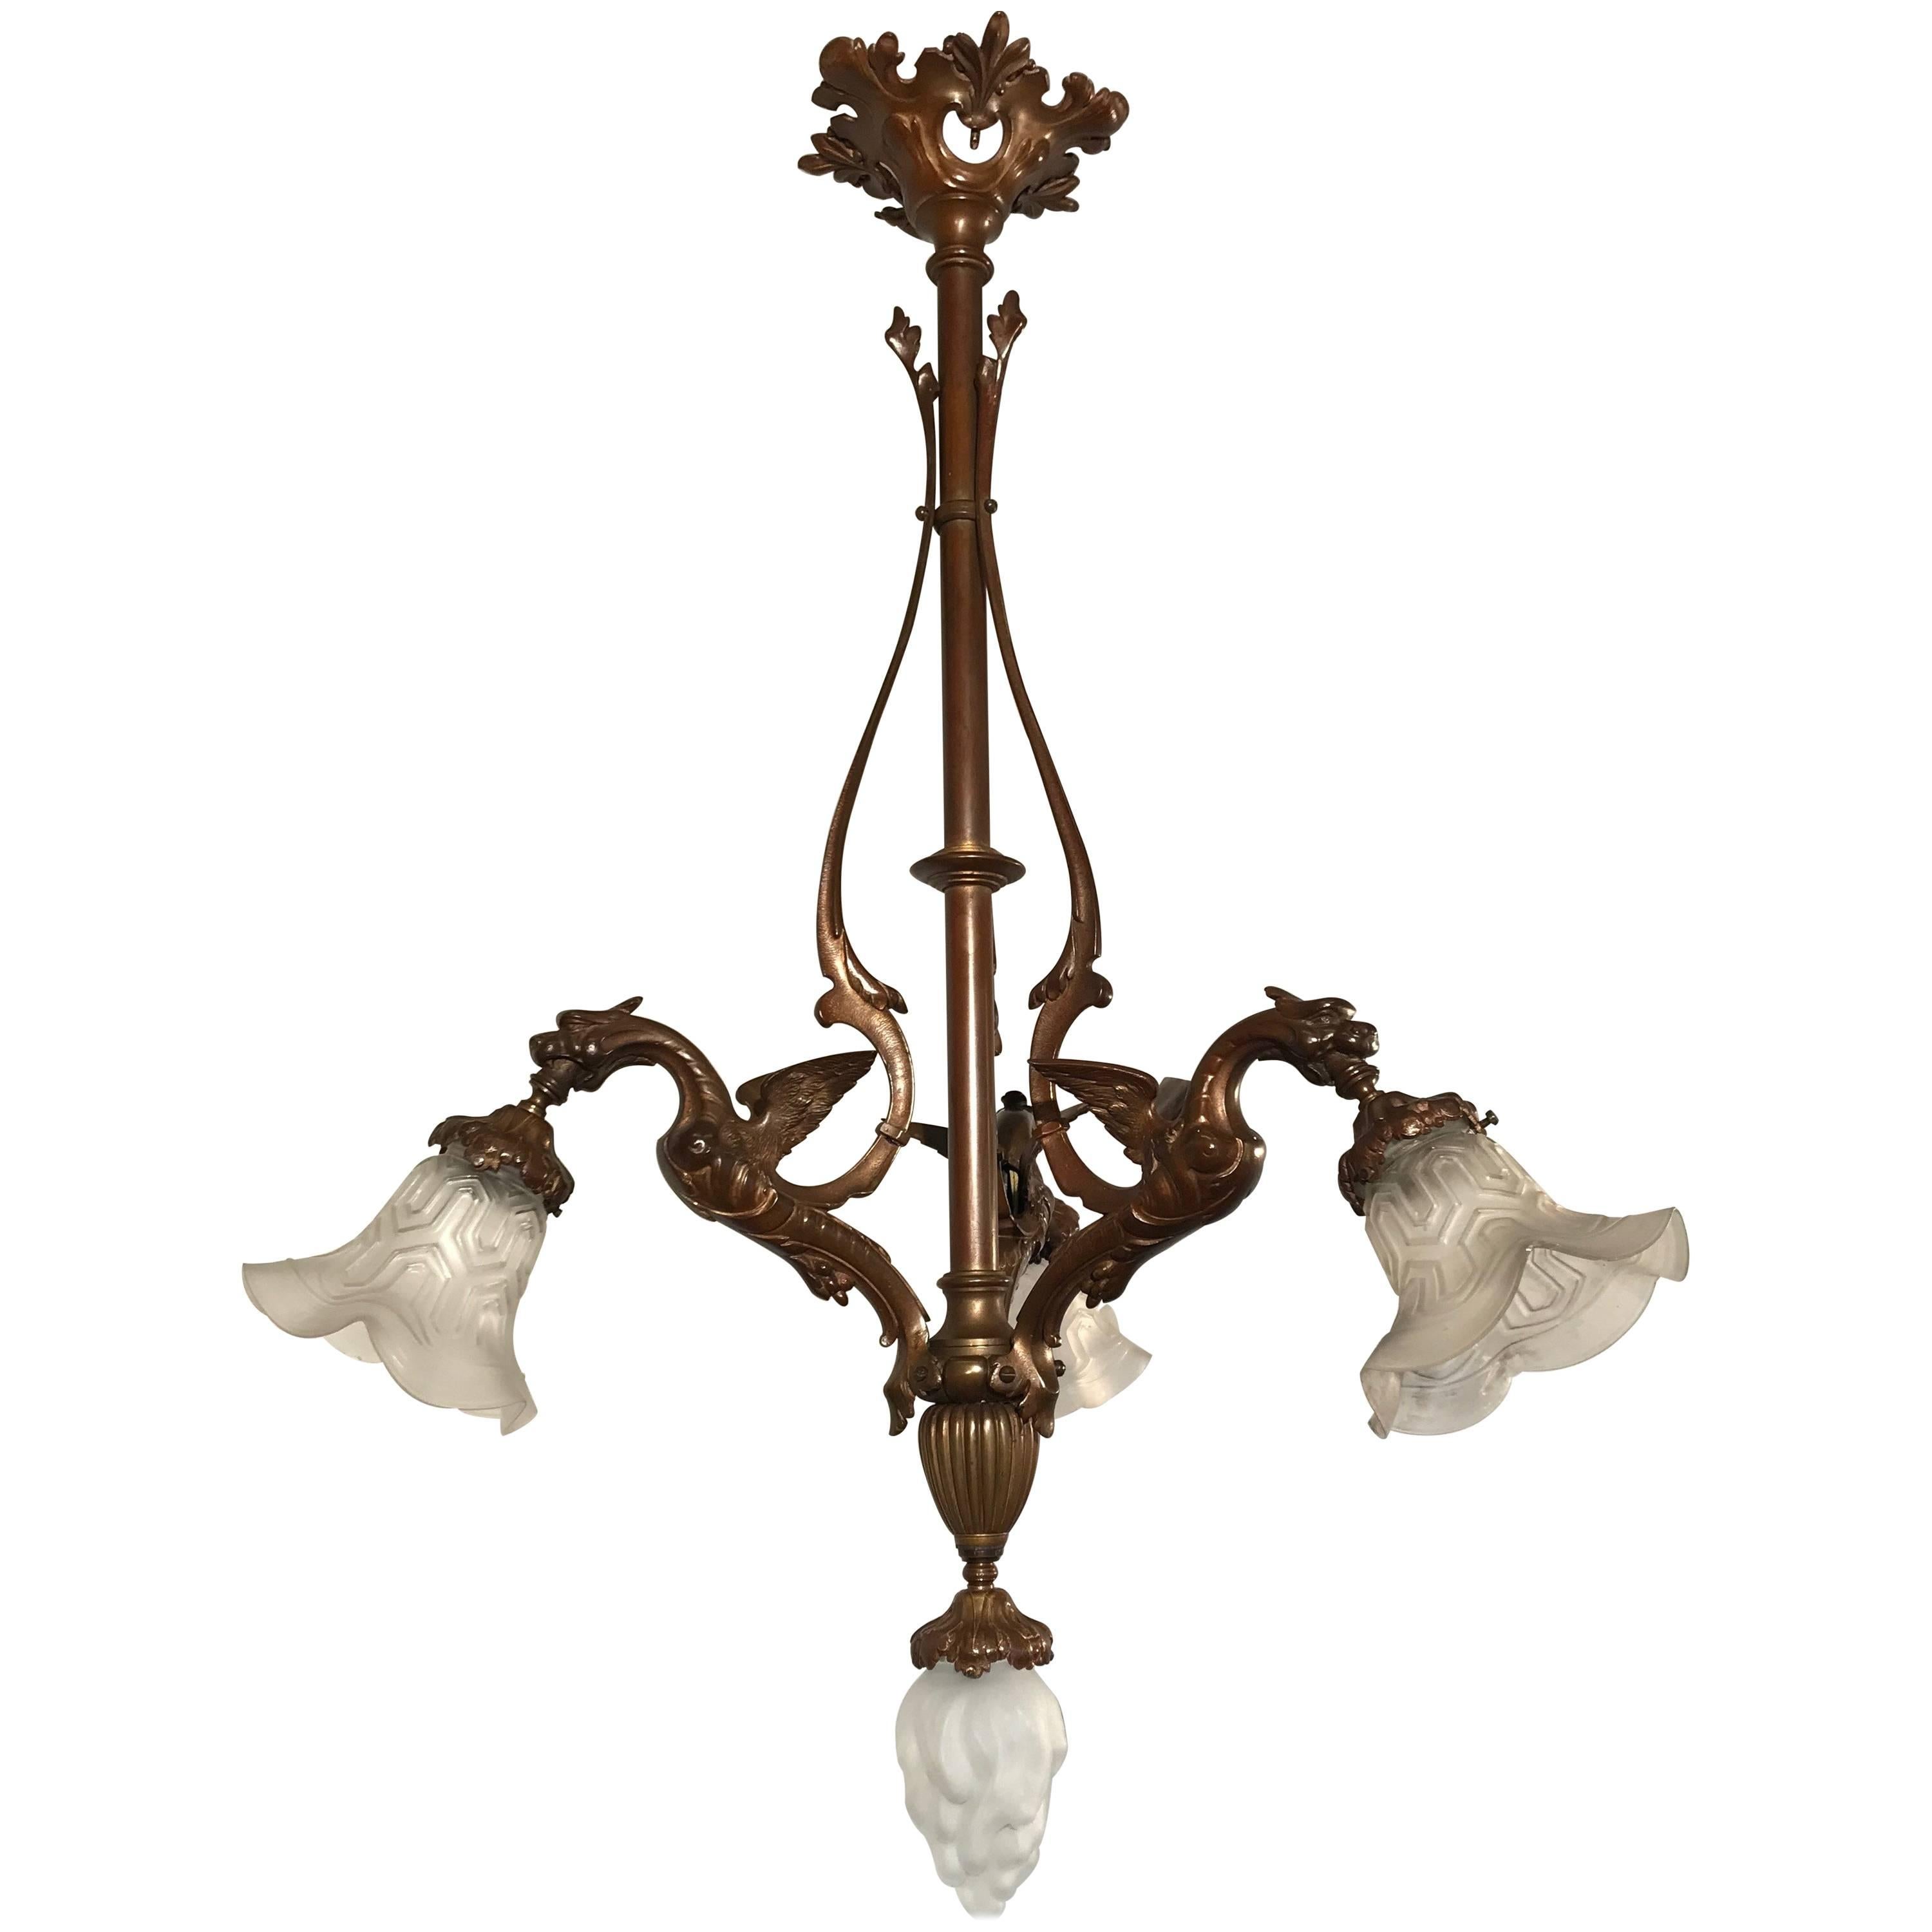 French Bronze Gothic Revival Four-Light Dragon Chandelier with Glass Shades